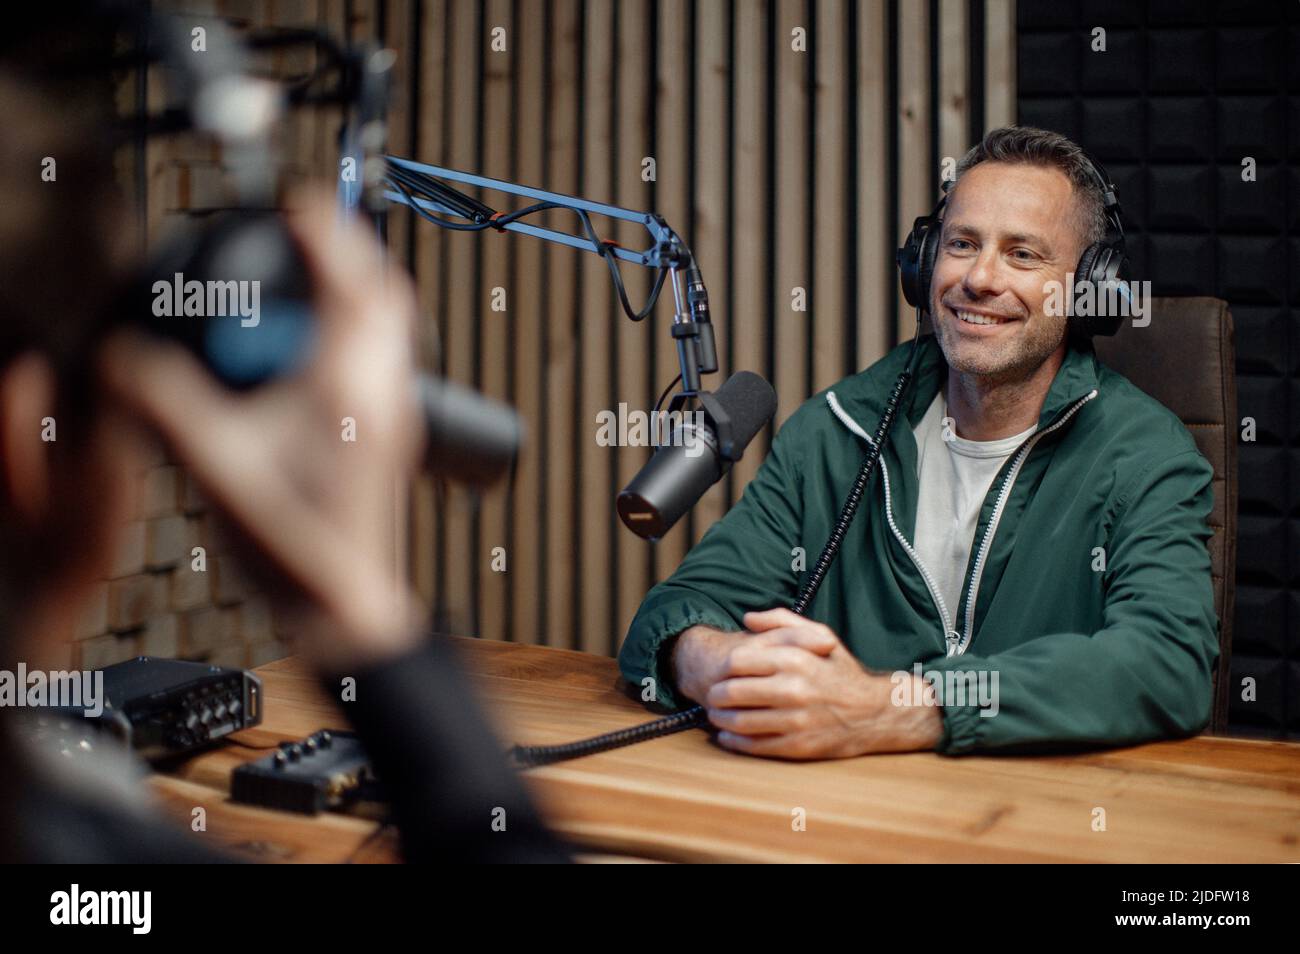 Man host talking to microphone and interviewing a man for a radio podcast. Stock Photo